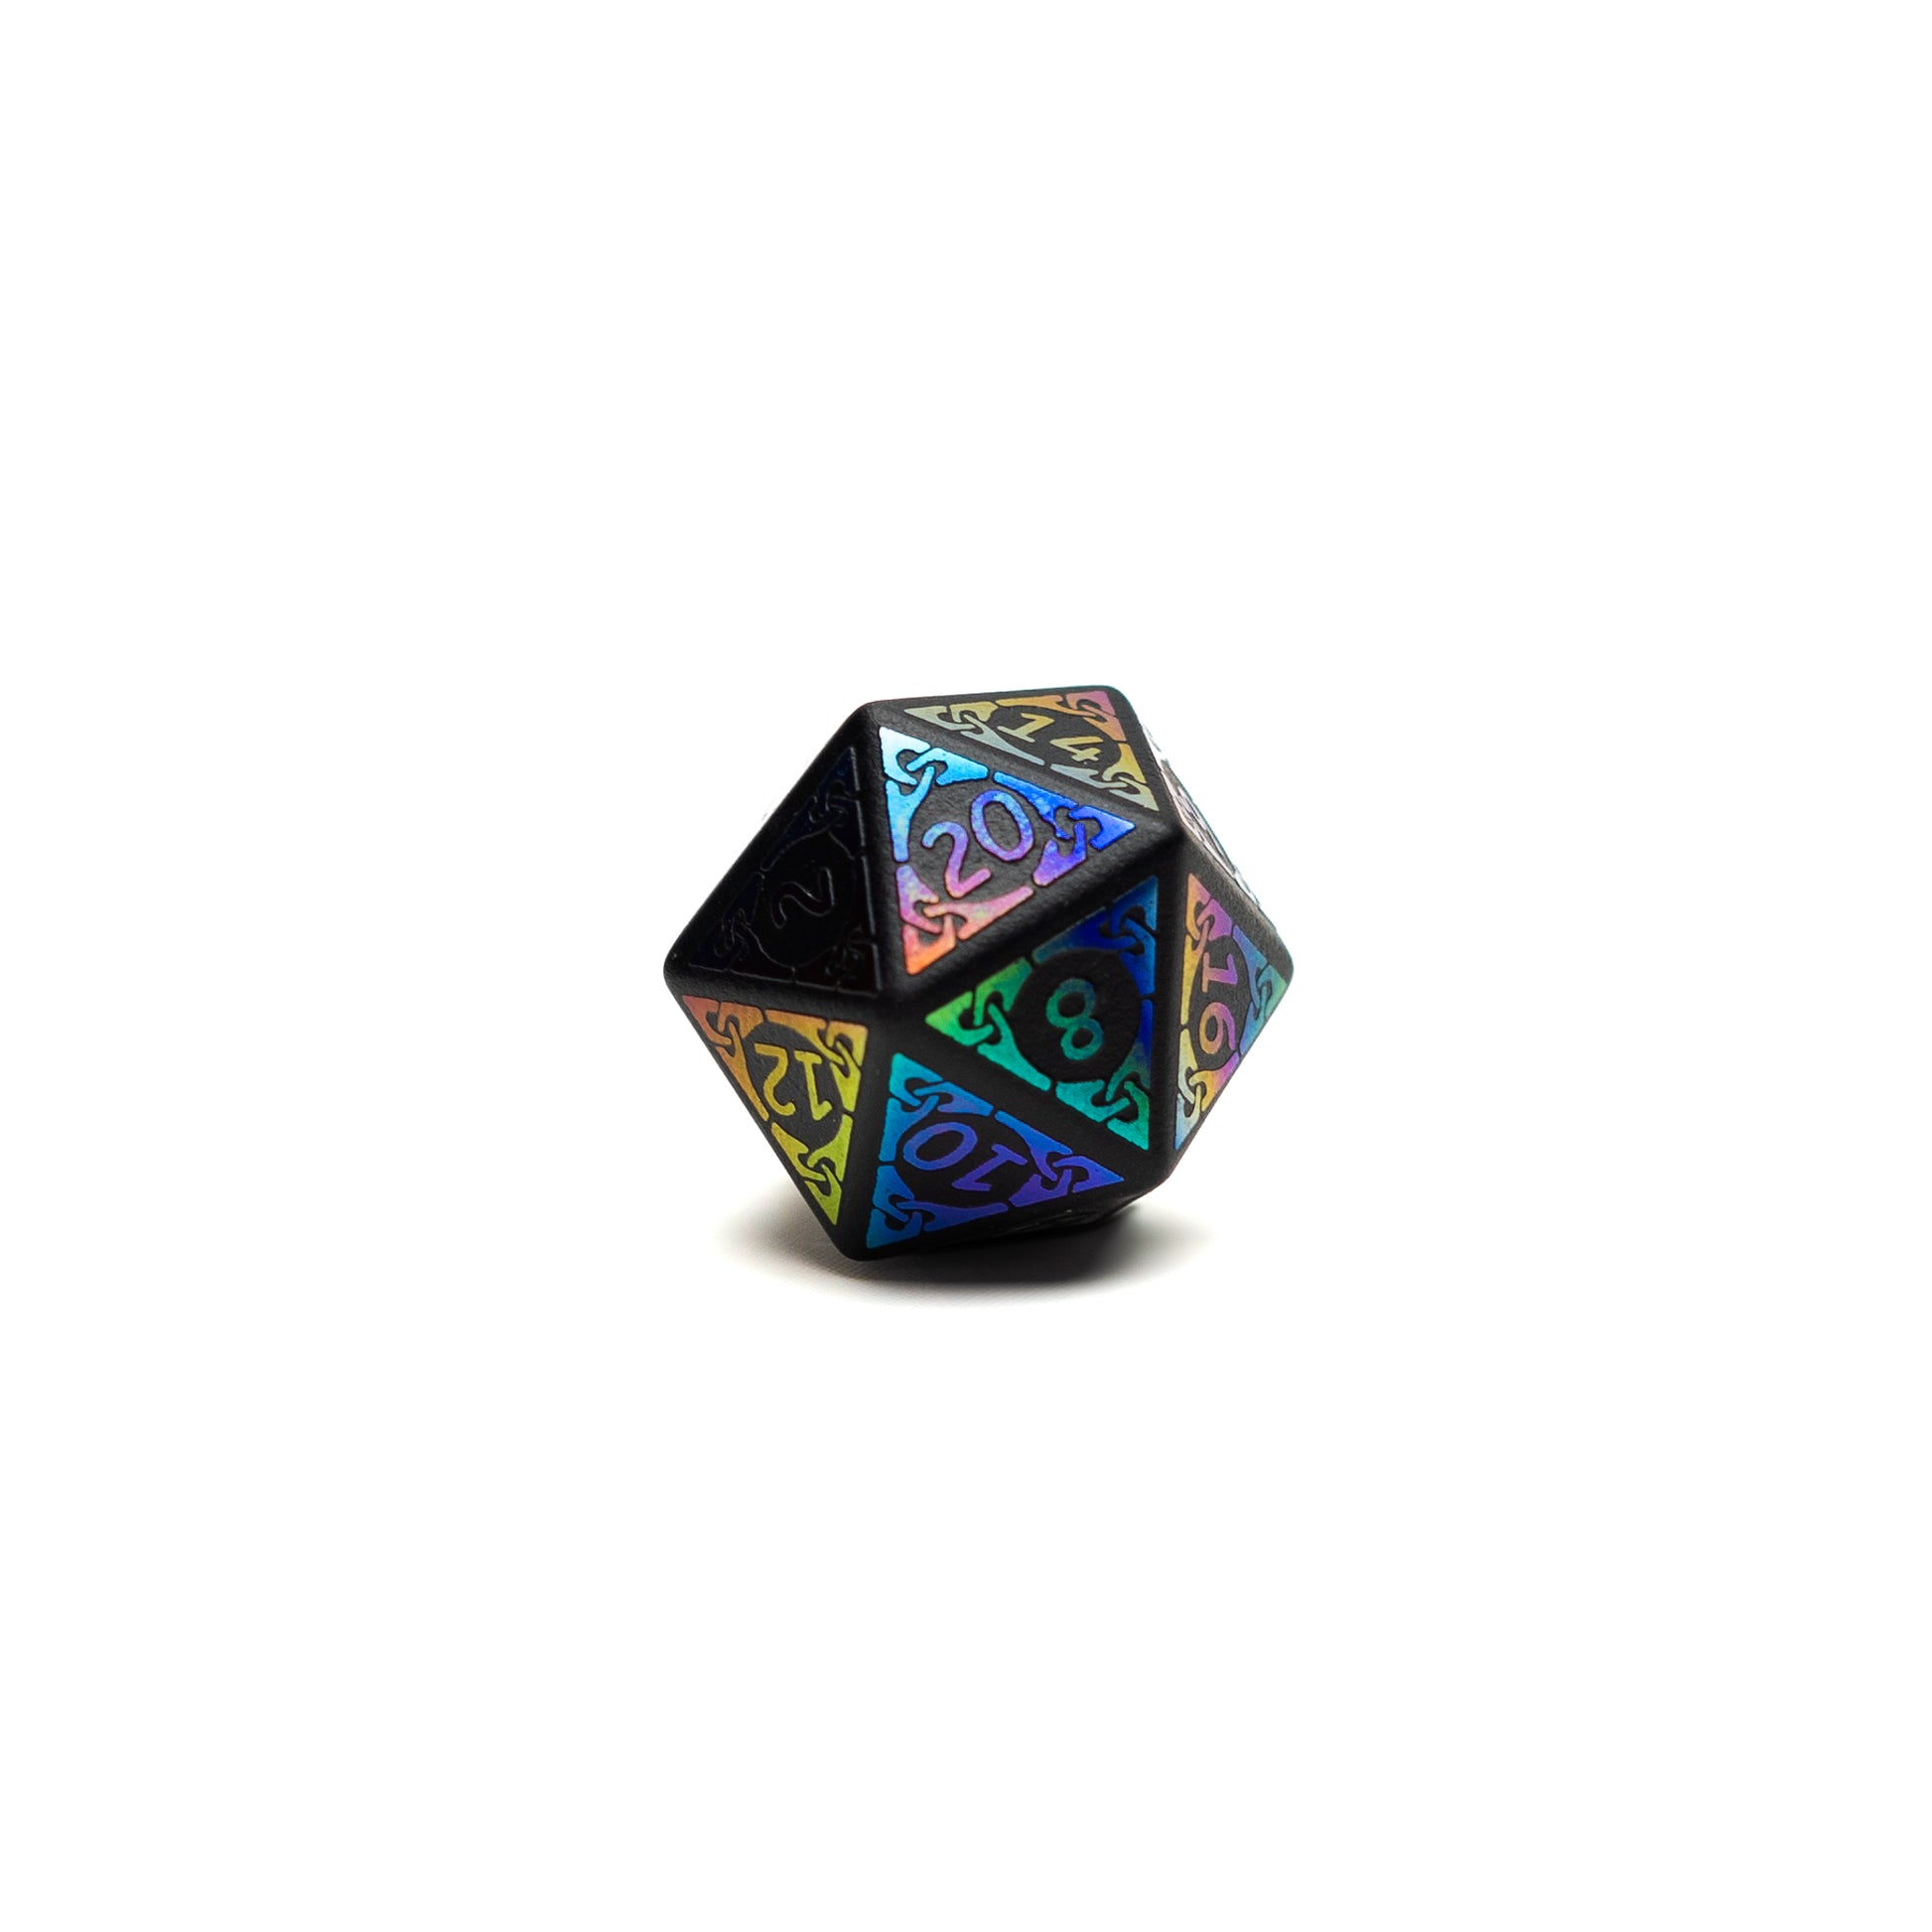 Roll Britannia Sharp Edged Obsidian Gemstone Dungeons and Dragons D20 Dice with Iridescent details